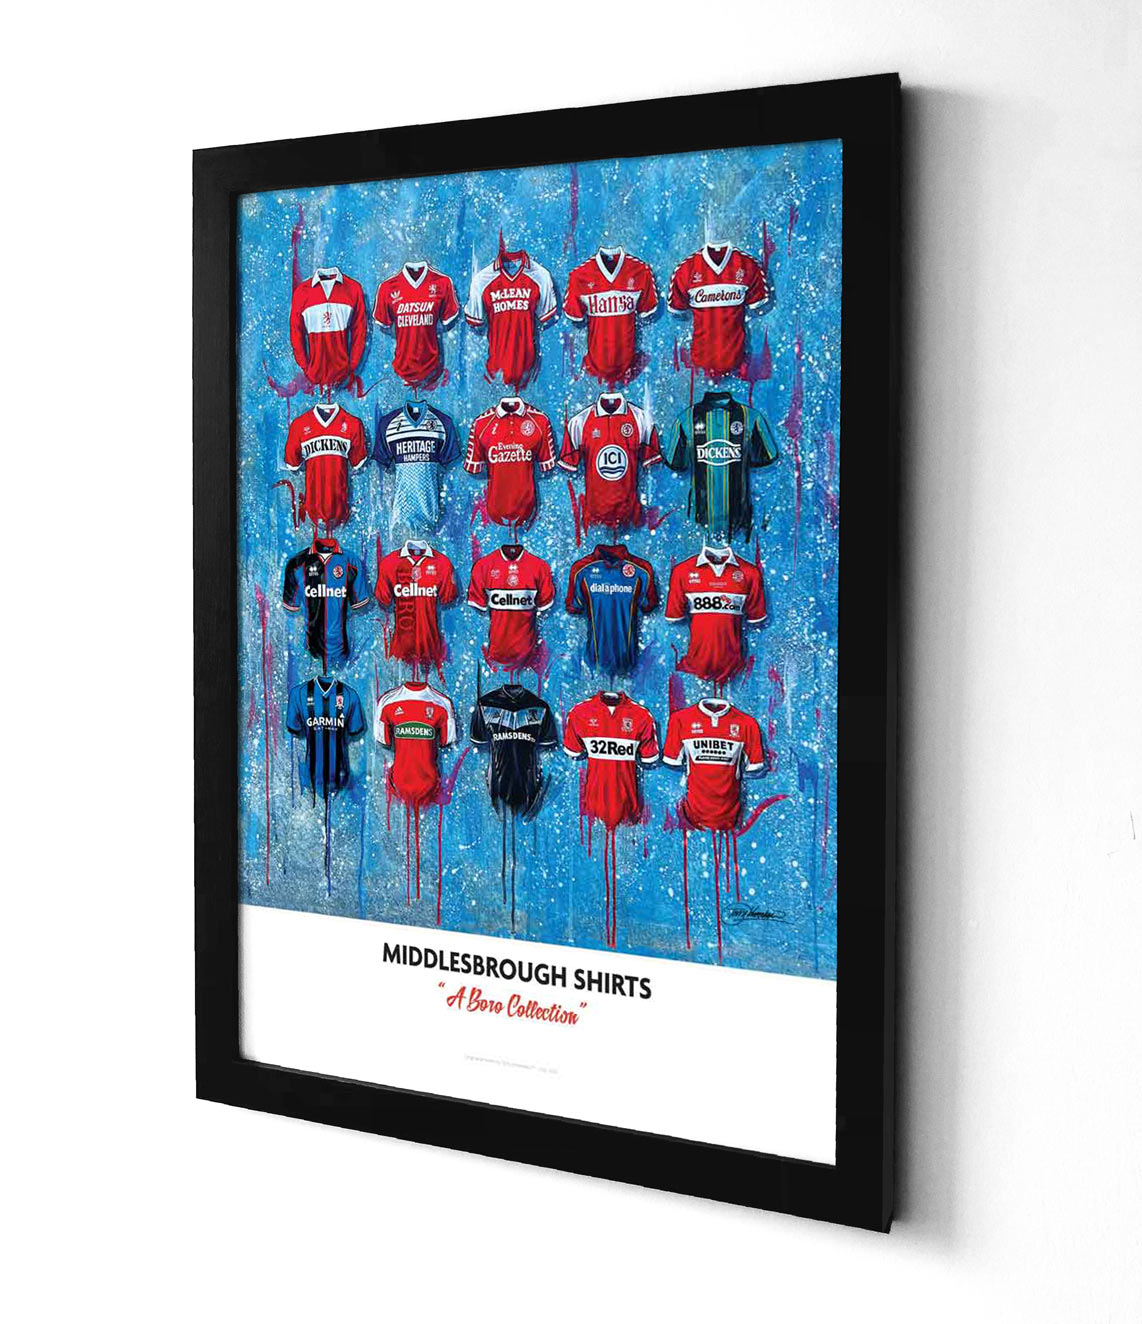 Get your personalized Middlesbrough Shirts from Terry Kneeshaw Art. These A2 sized shirts feature a dynamic design showcasing the iconic Middlesbrough team crest, along with player names and numbers to create a unique and personalized touch. Made from premium materials, these shirts are perfect for avid Middlesbrough fans and players alike. Order yours today and show your support for the team on and off the field. Stand out with style with these Middlesbrough shirts by Terry Kneeshaw Art!